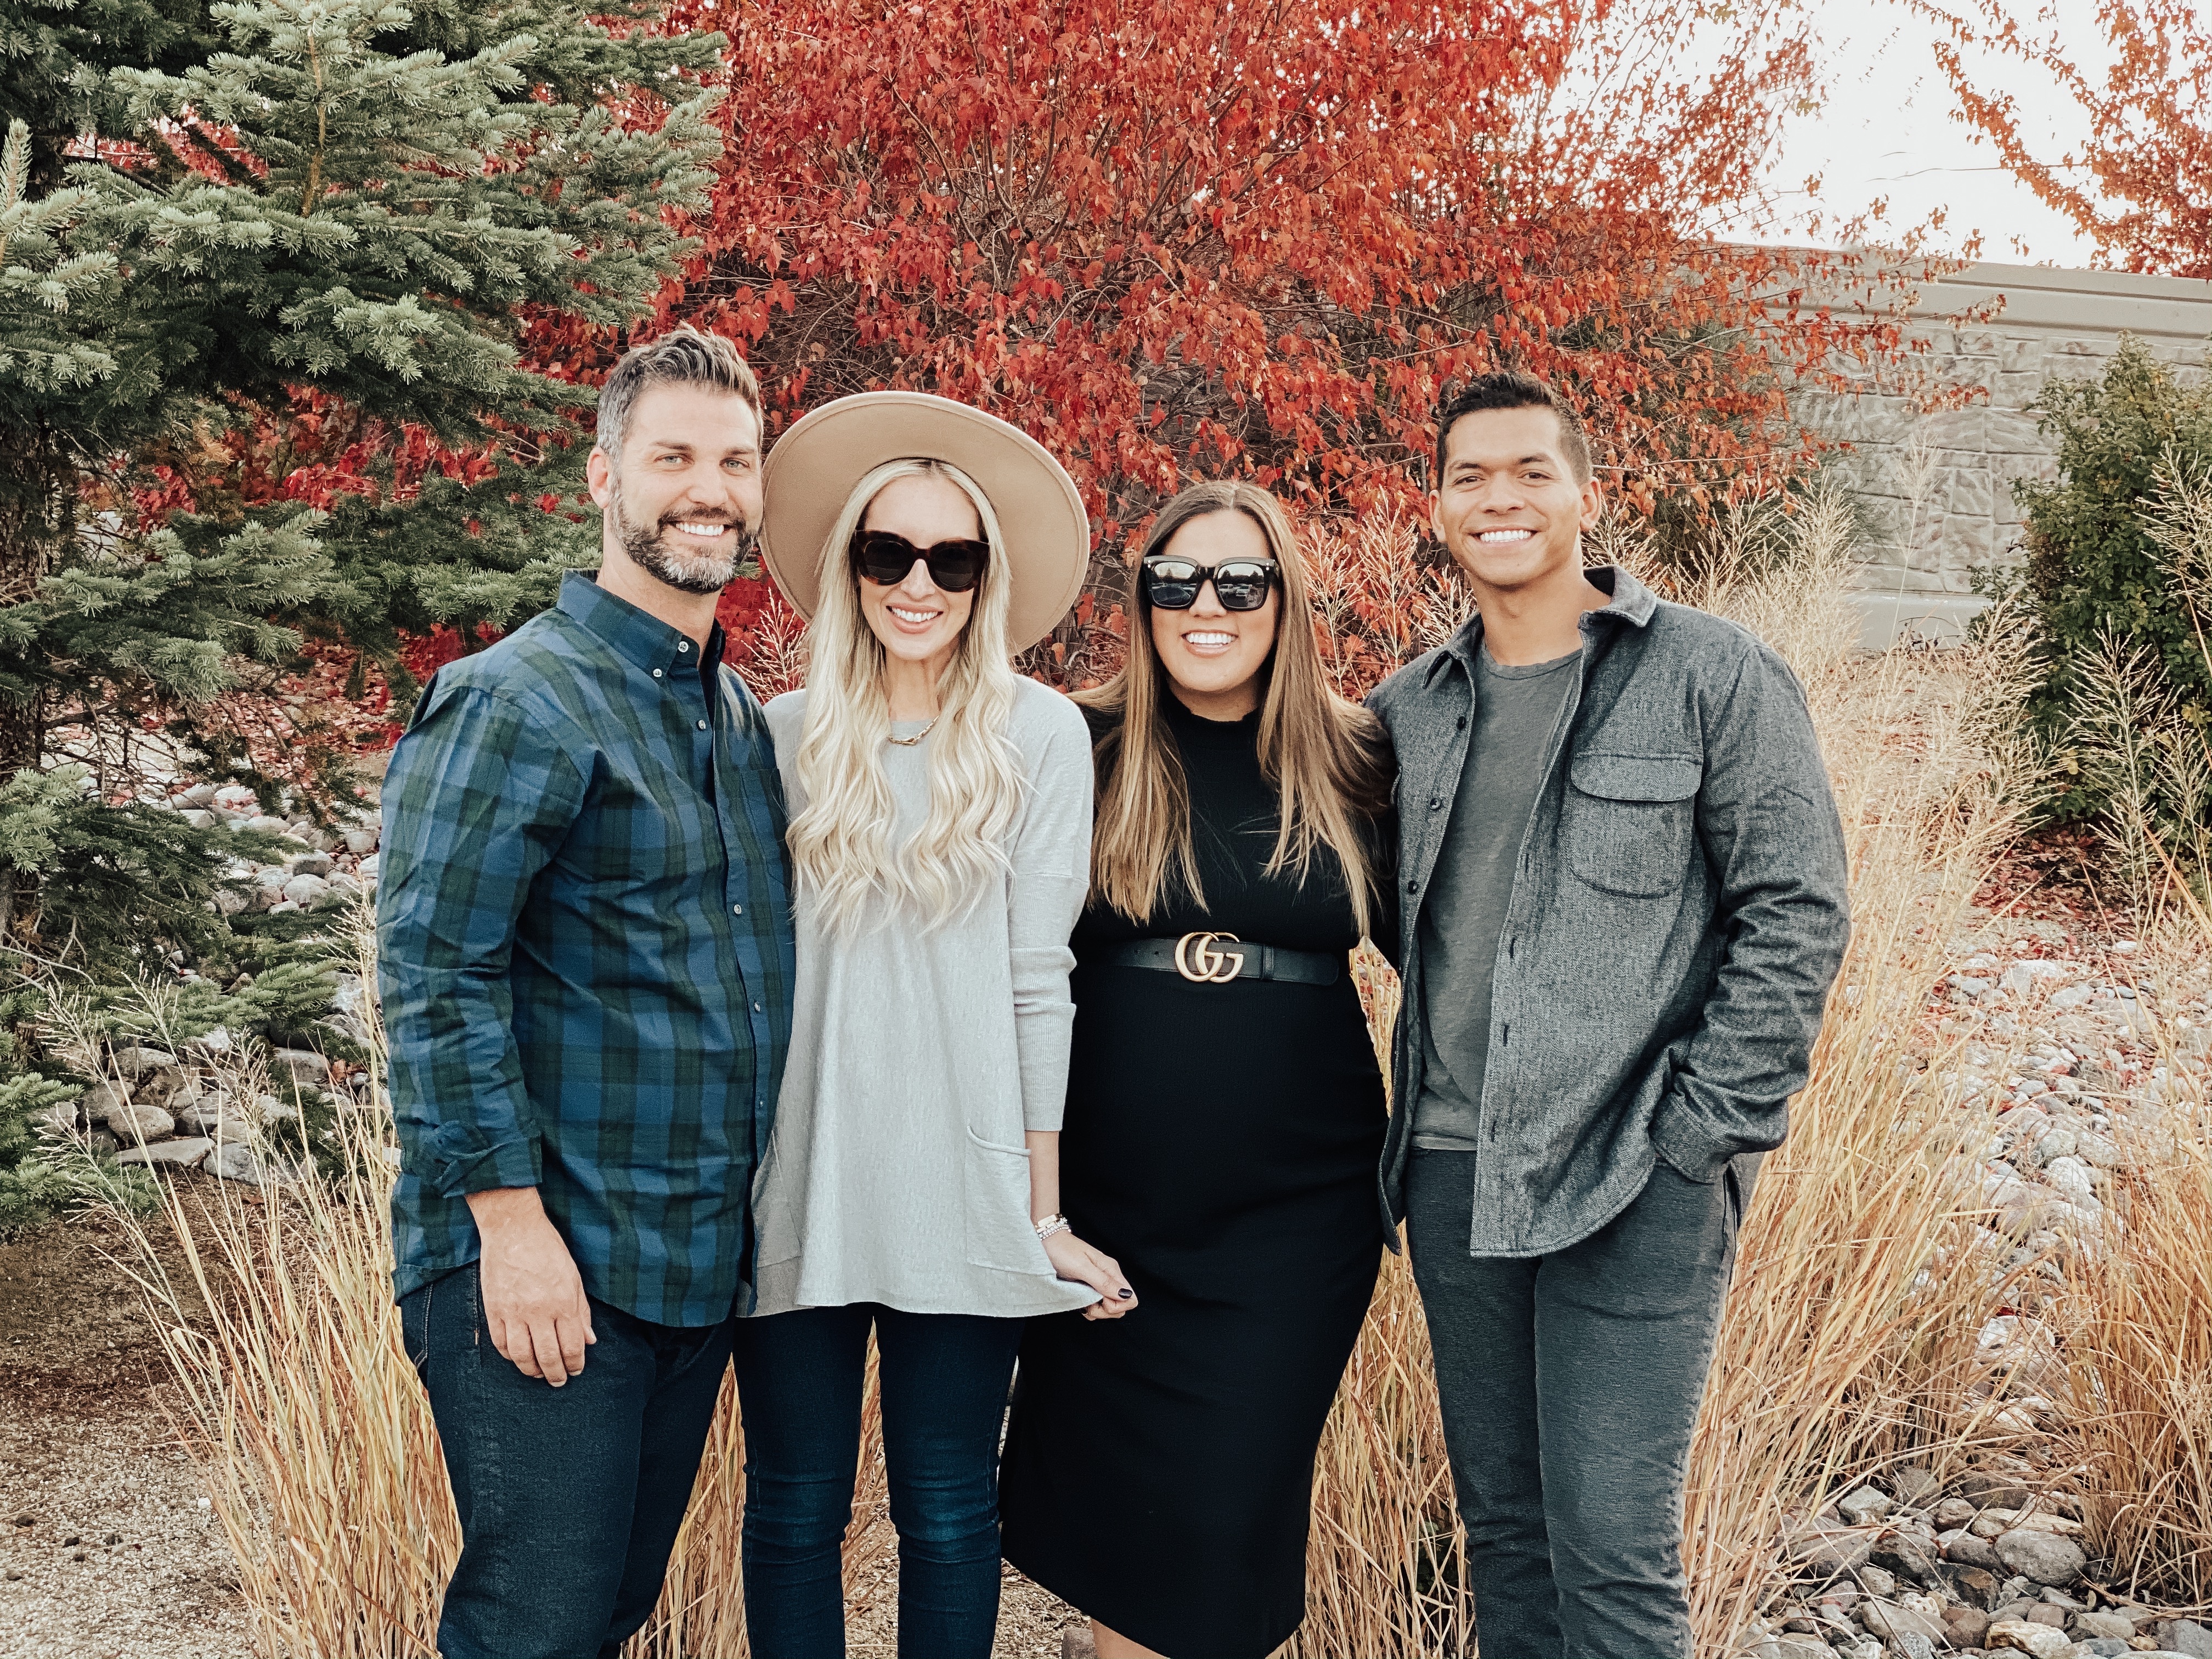 Bloggers Ashley Zeal and Emily Wieczorek share their Gift Guide for Him 2019. They are sharing the best products to buy the men in your lives this holiday season!